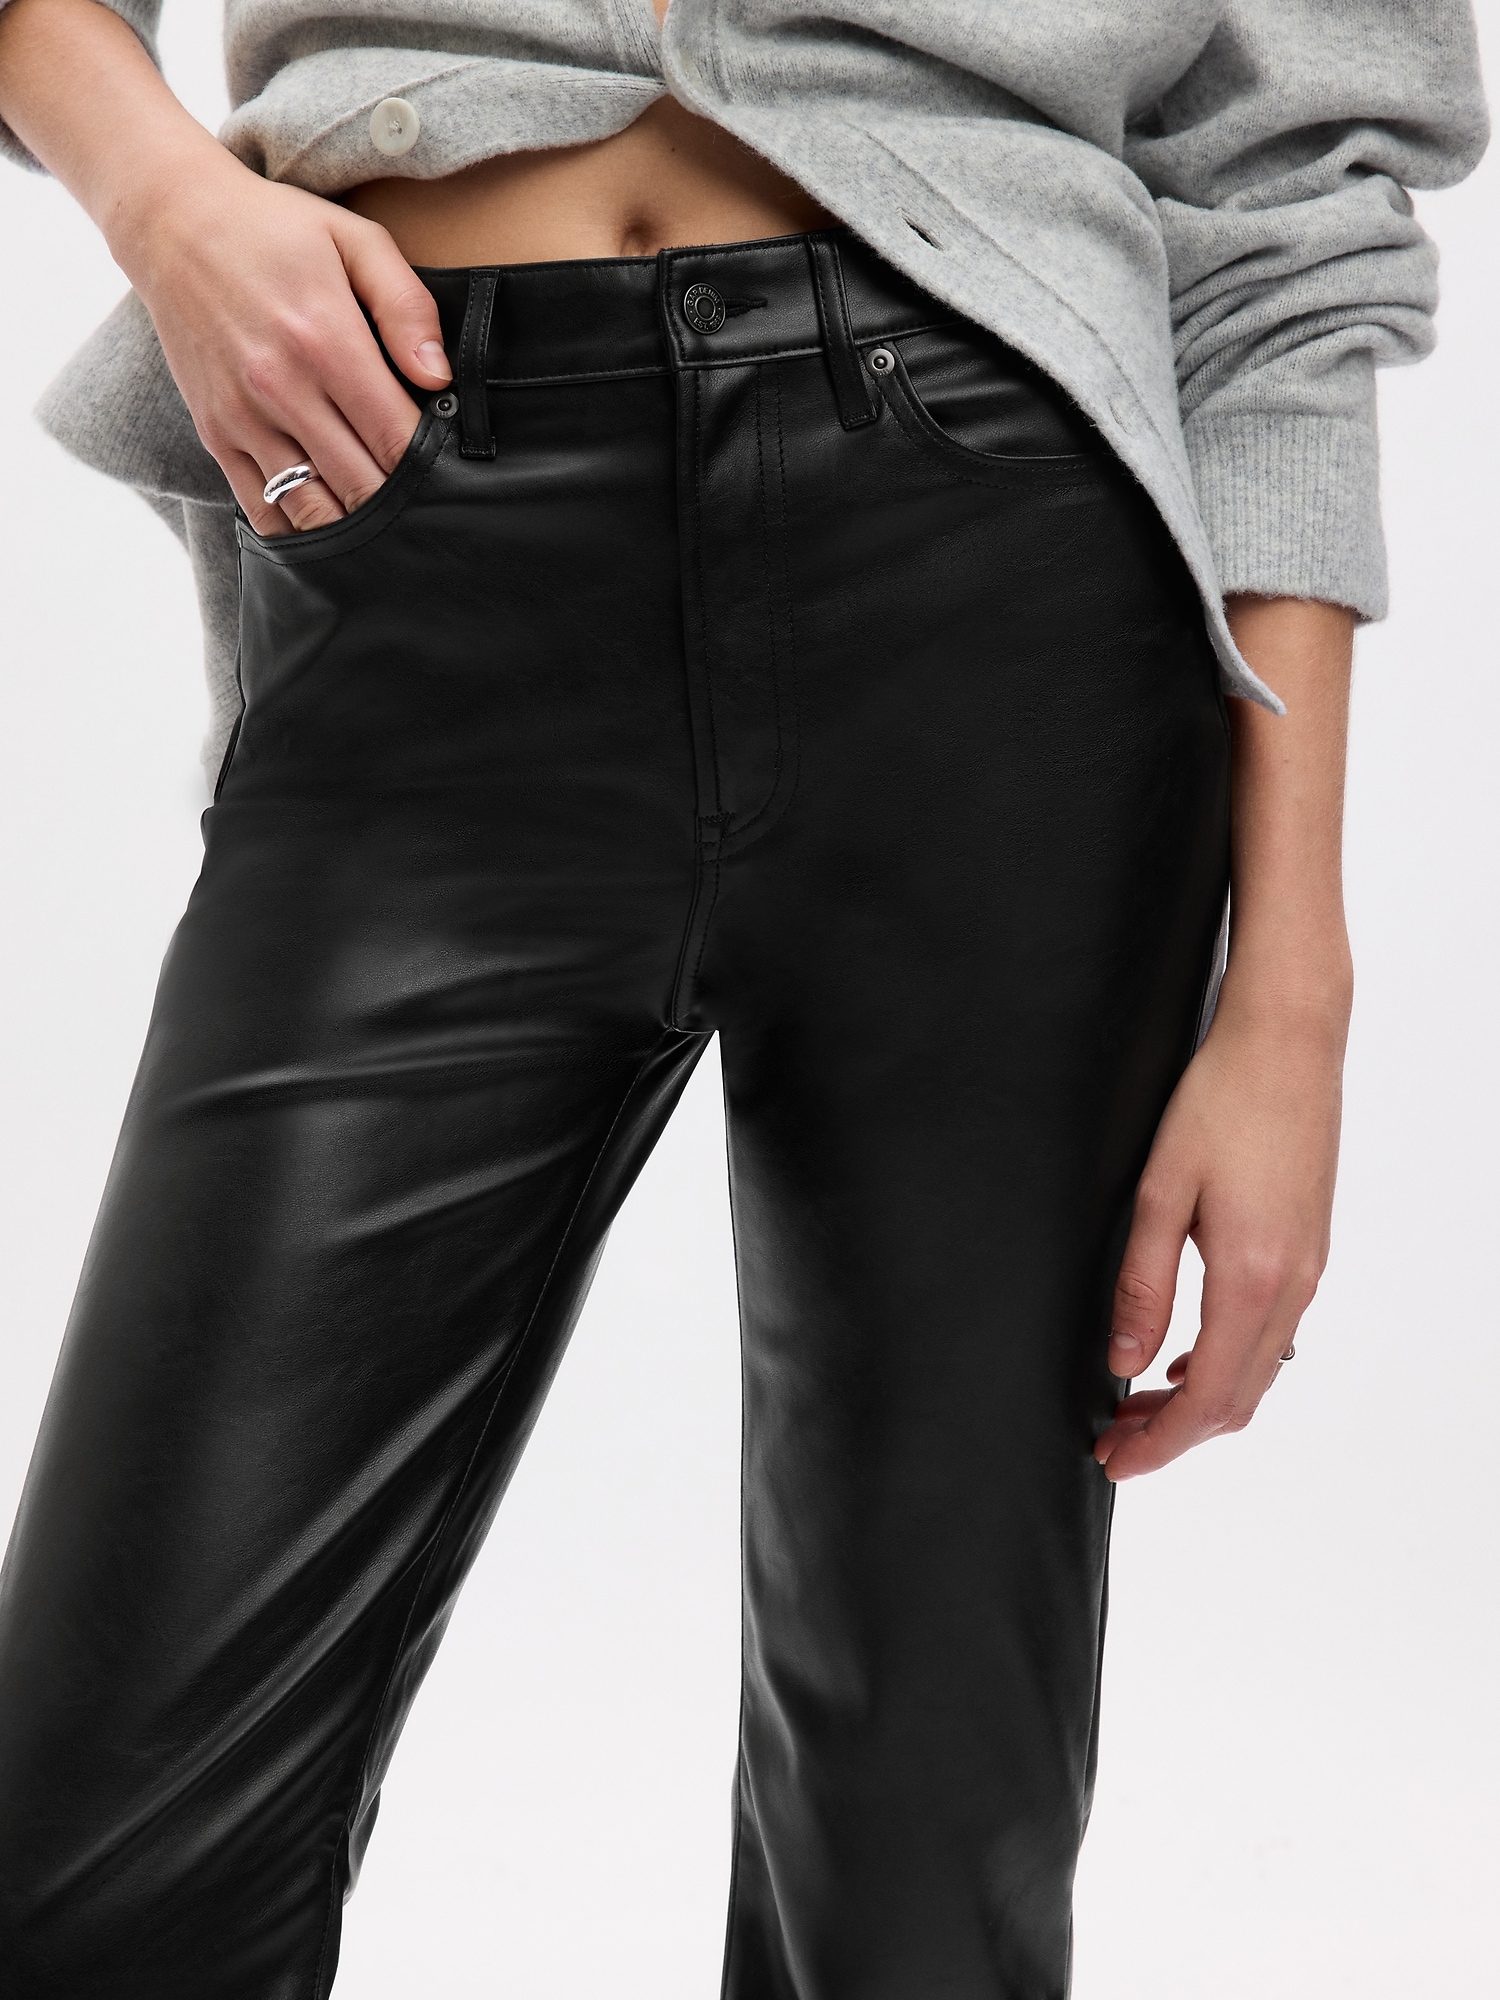 Flare Leather Pants for Women Stretchy High Waisted Zipper Loose Fit Split  Hem Pull on Work Pants with Pockets